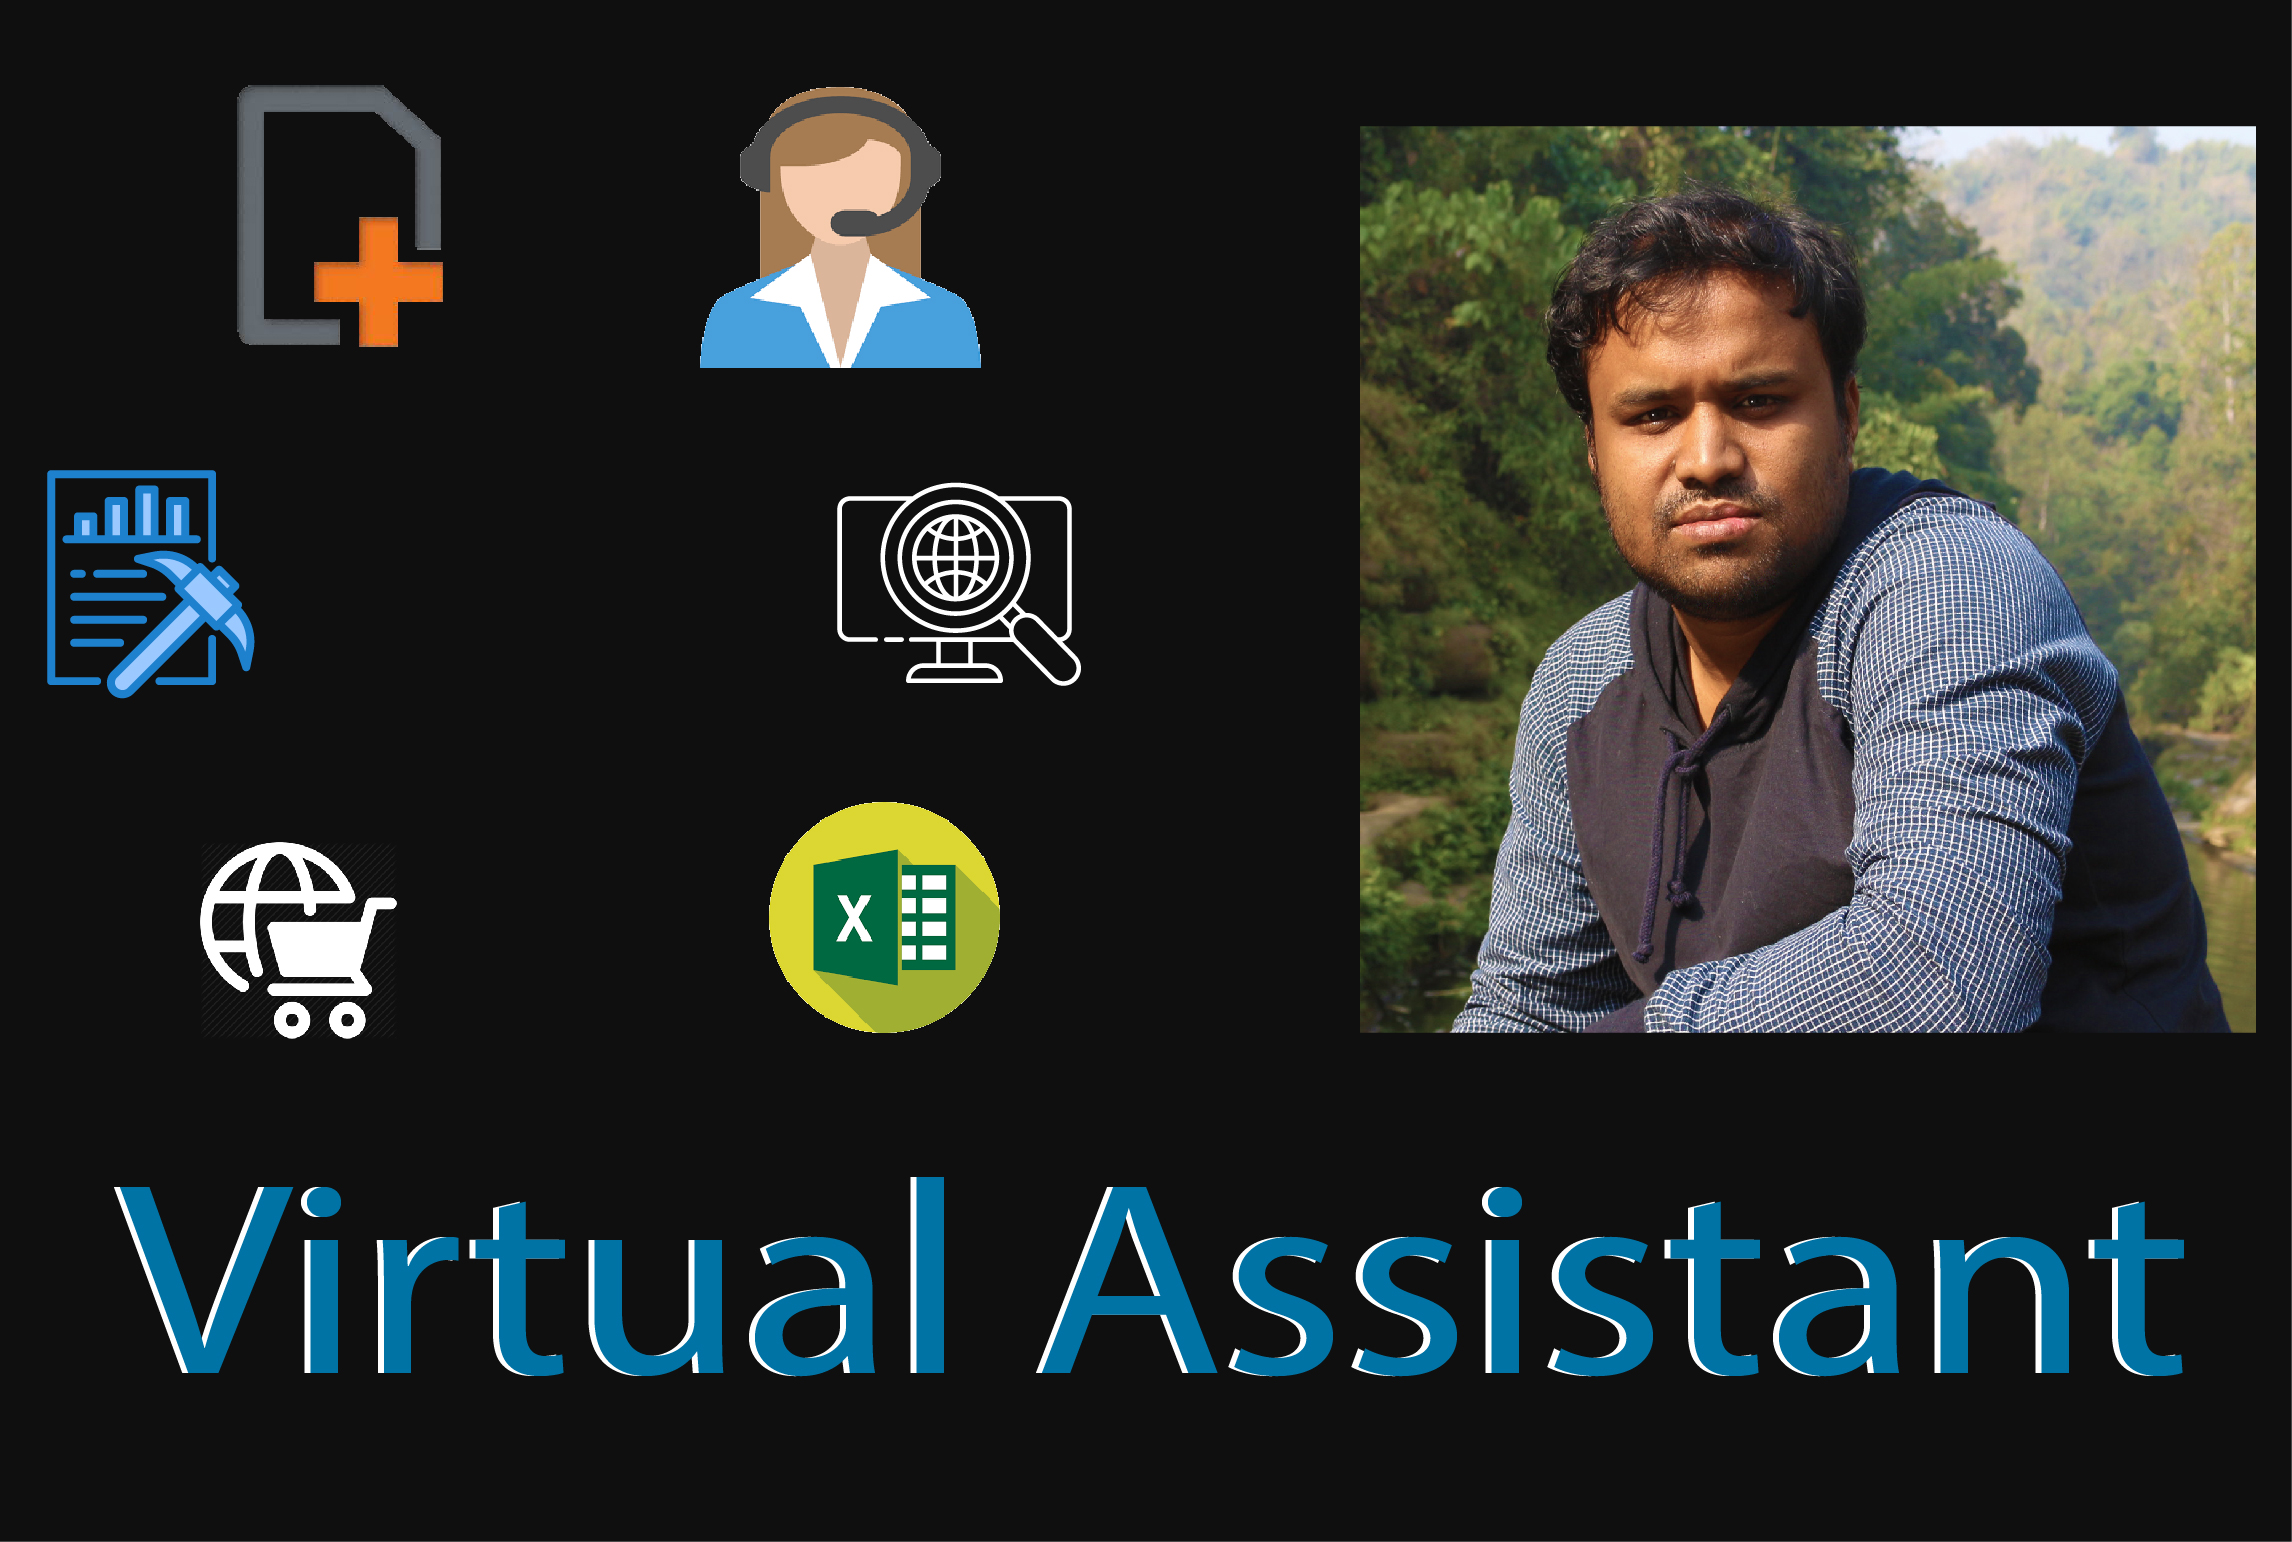 9503I will be your virtual assistant for web research & data entry